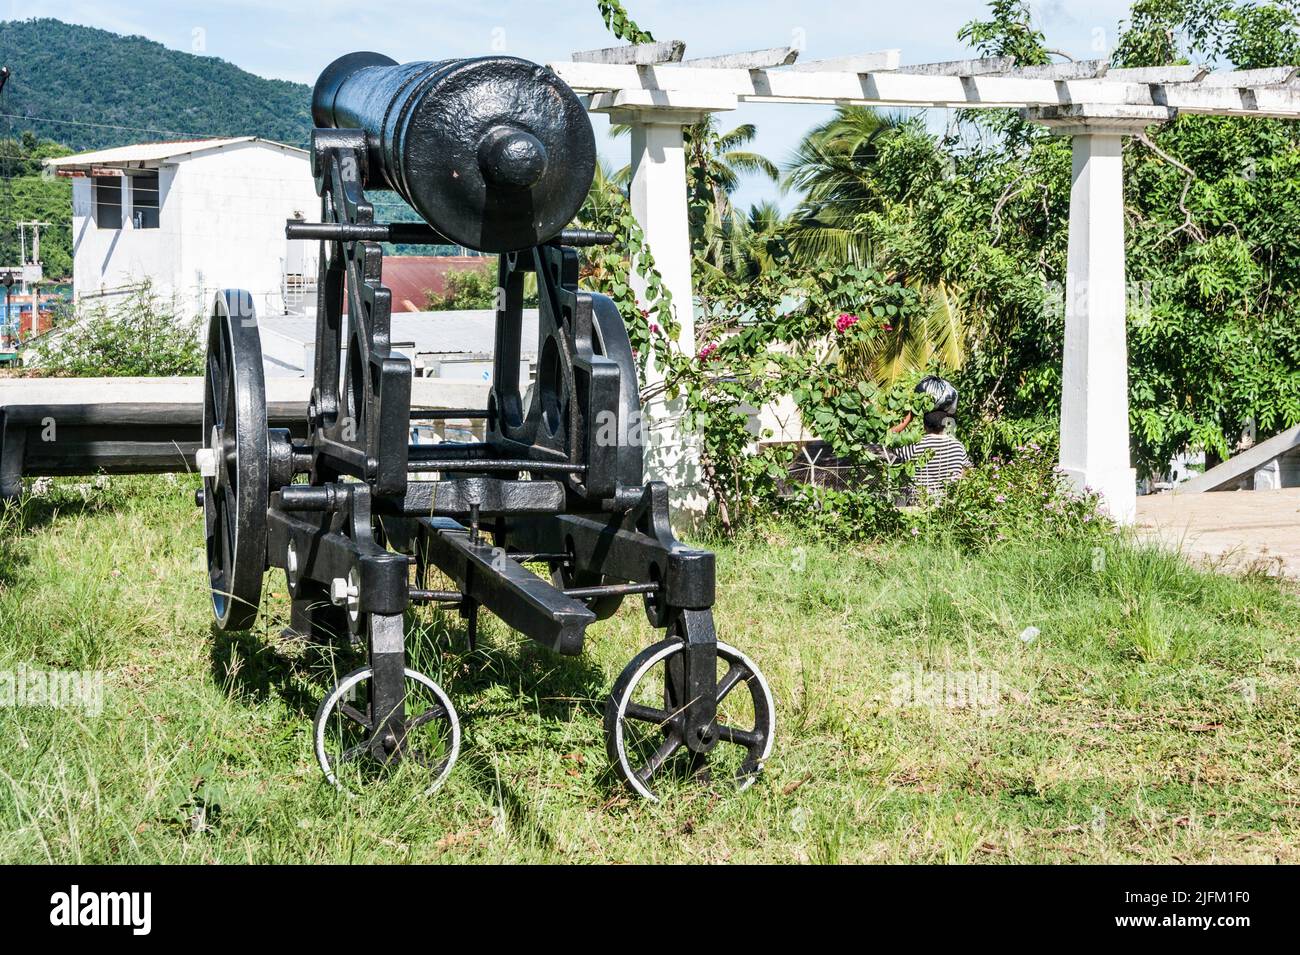 Cannon on display. Hell-Ville (Andoany), Nosy Be, Madagascar. Stock Photo